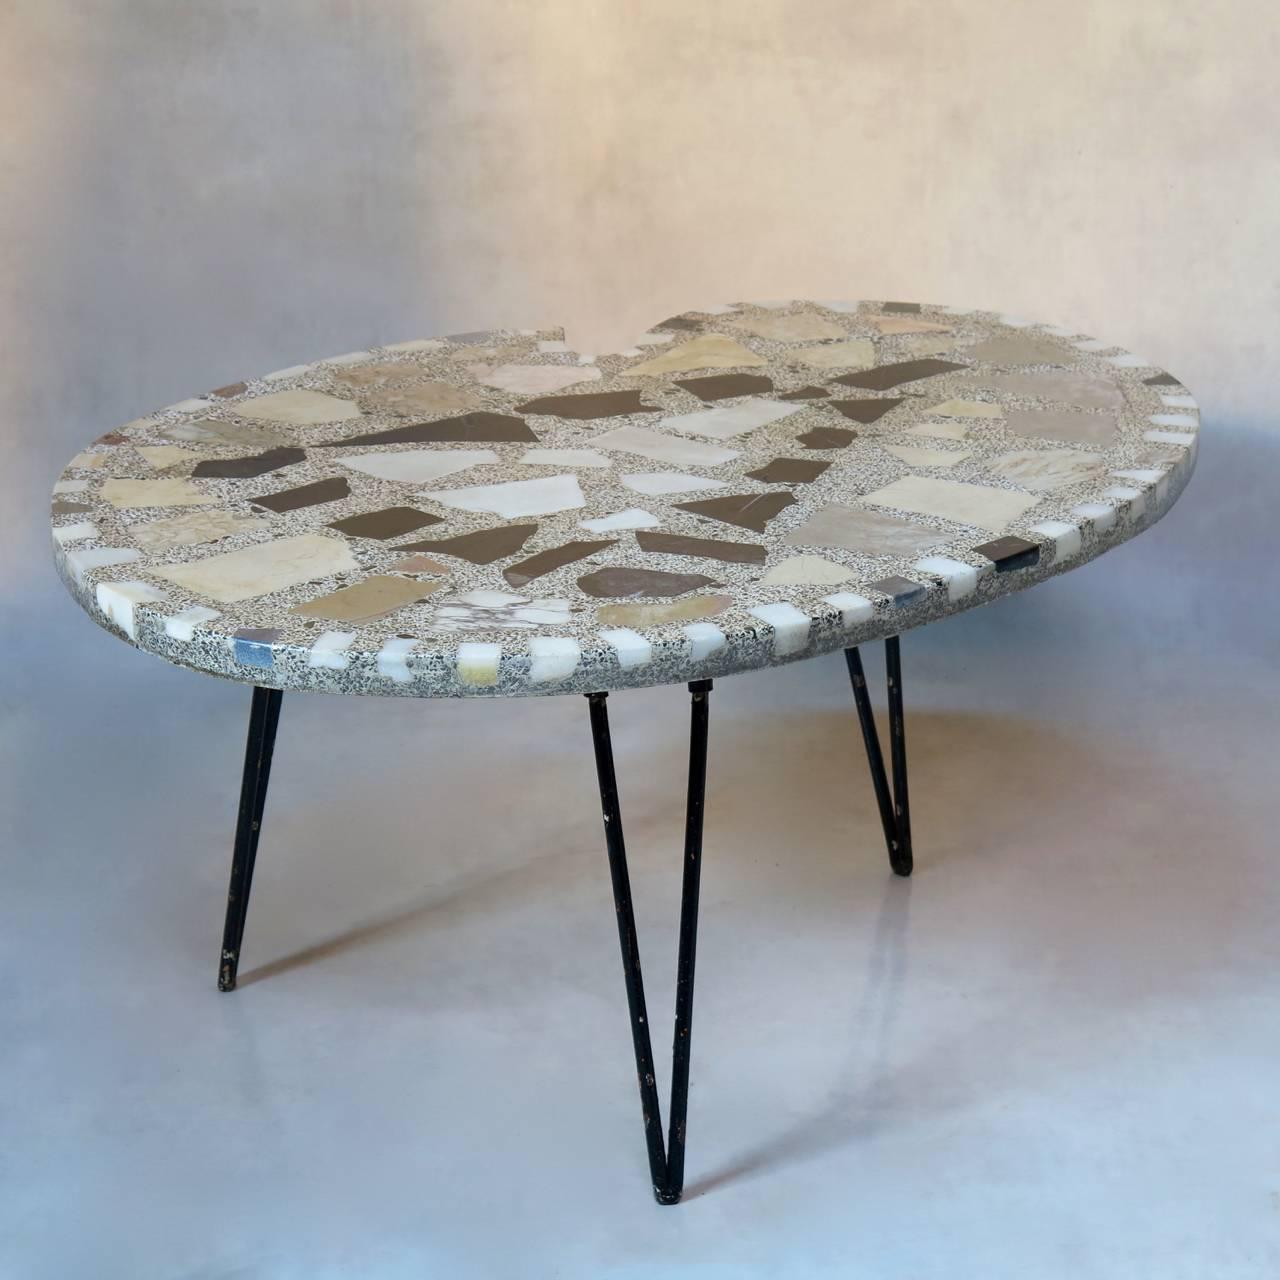 French Palette-Shaped Coffee Table with Terrazzo Marble Top - France, 1950s